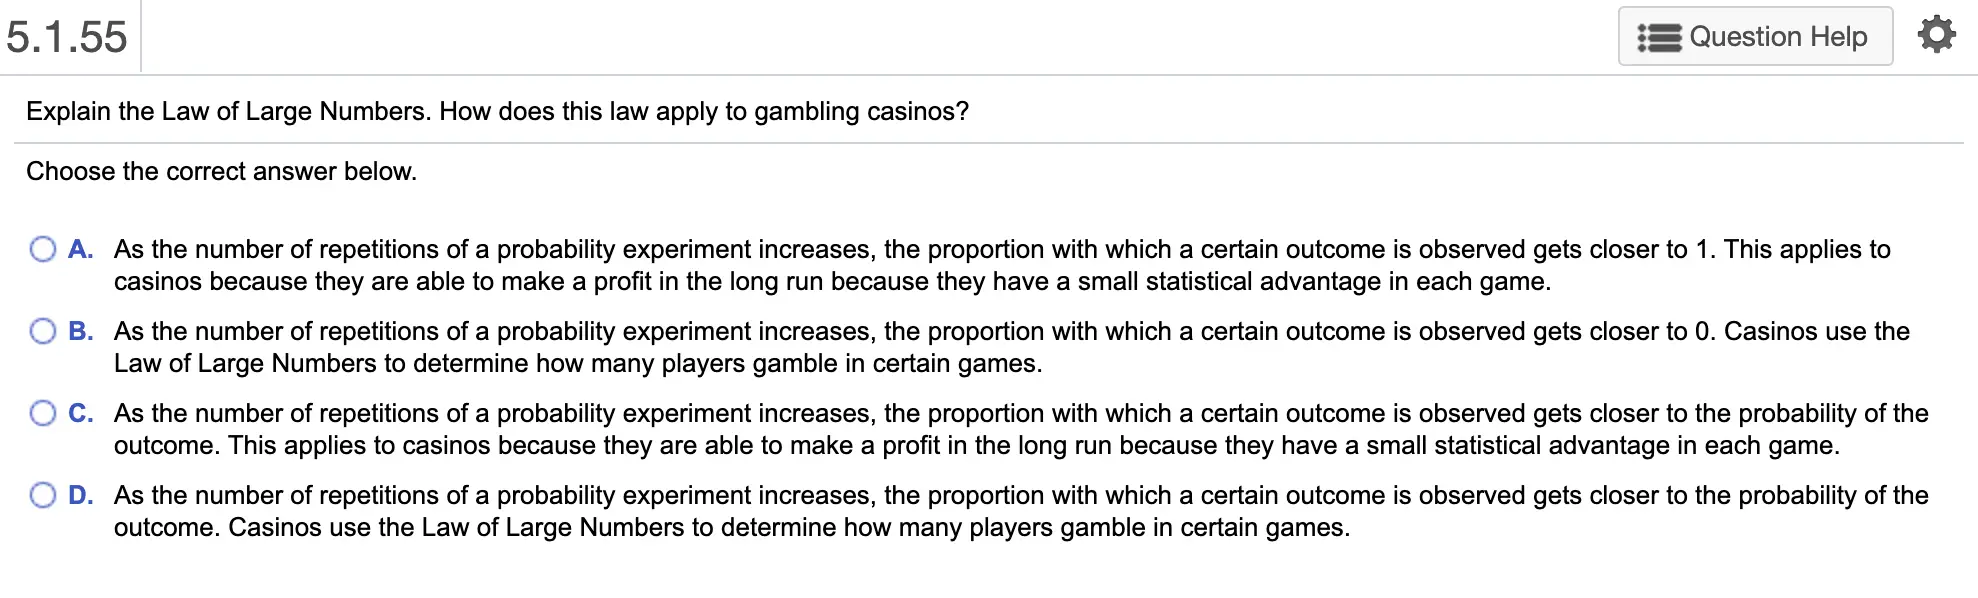 5.1.55 Question Help Explain the Law of Large Numbers. How does this law apply to gambling casinos? Choose the correct answer below. O A. As the number of repetitions of a probability experiment increases, the proportion with which a certain outcome is observed gets closer to 1. This applies to casinos because they are able to make a profit in the long run because they have a small statistical advantage in each game. B. As the number of repetitions of a probability experiment increases, the proportion with which a certain outcome is observed gets closer to 0. Casinos use the Law of Large Numbers to determine how many players gamble in certain games. O C. As the number of repetitions of a probability experiment increases, the proportion with which a certain outcome is observed gets closer to the probability of the outcome. This applies to casinos because they are able to make a profit in the long run because they have a small statistical advantage in each game. D. As the number of repetitions of a probability experiment increases, the proportion with which a certain outcome is observed gets closer to the probability of the outcome. Casinos use the Law of Large Numbers to determine how many players gamble in certain games.